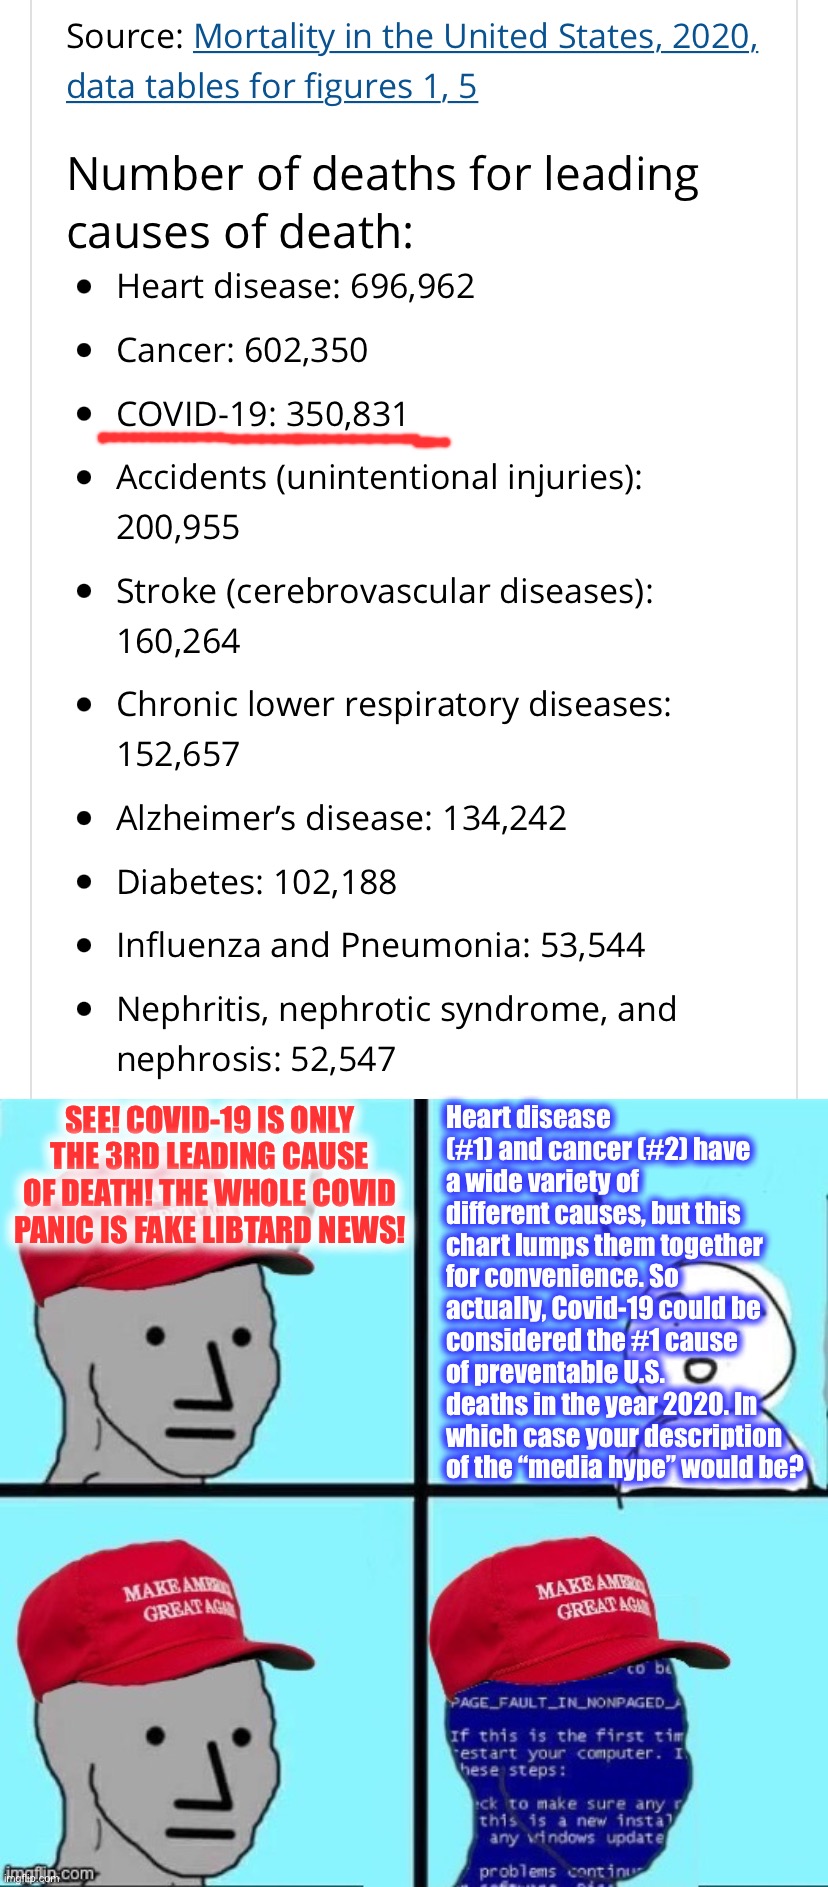 There are lies, damn lies, statistics, and the plain fact that Covid-19 killed 350,000+ in the year 2020. | Heart disease (#1) and cancer (#2) have a wide variety of different causes, but this chart lumps them together for convenience. So actually, Covid-19 could be considered the #1 cause of preventable U.S. deaths in the year 2020. In which case your description of the “media hype” would be? SEE! COVID-19 IS ONLY THE 3RD LEADING CAUSE OF DEATH! THE WHOLE COVID PANIC IS FAKE LIBTARD NEWS! | image tagged in covid-19 3rd leading cause of death in u s,npc maga blue screen fixed textboxes | made w/ Imgflip meme maker